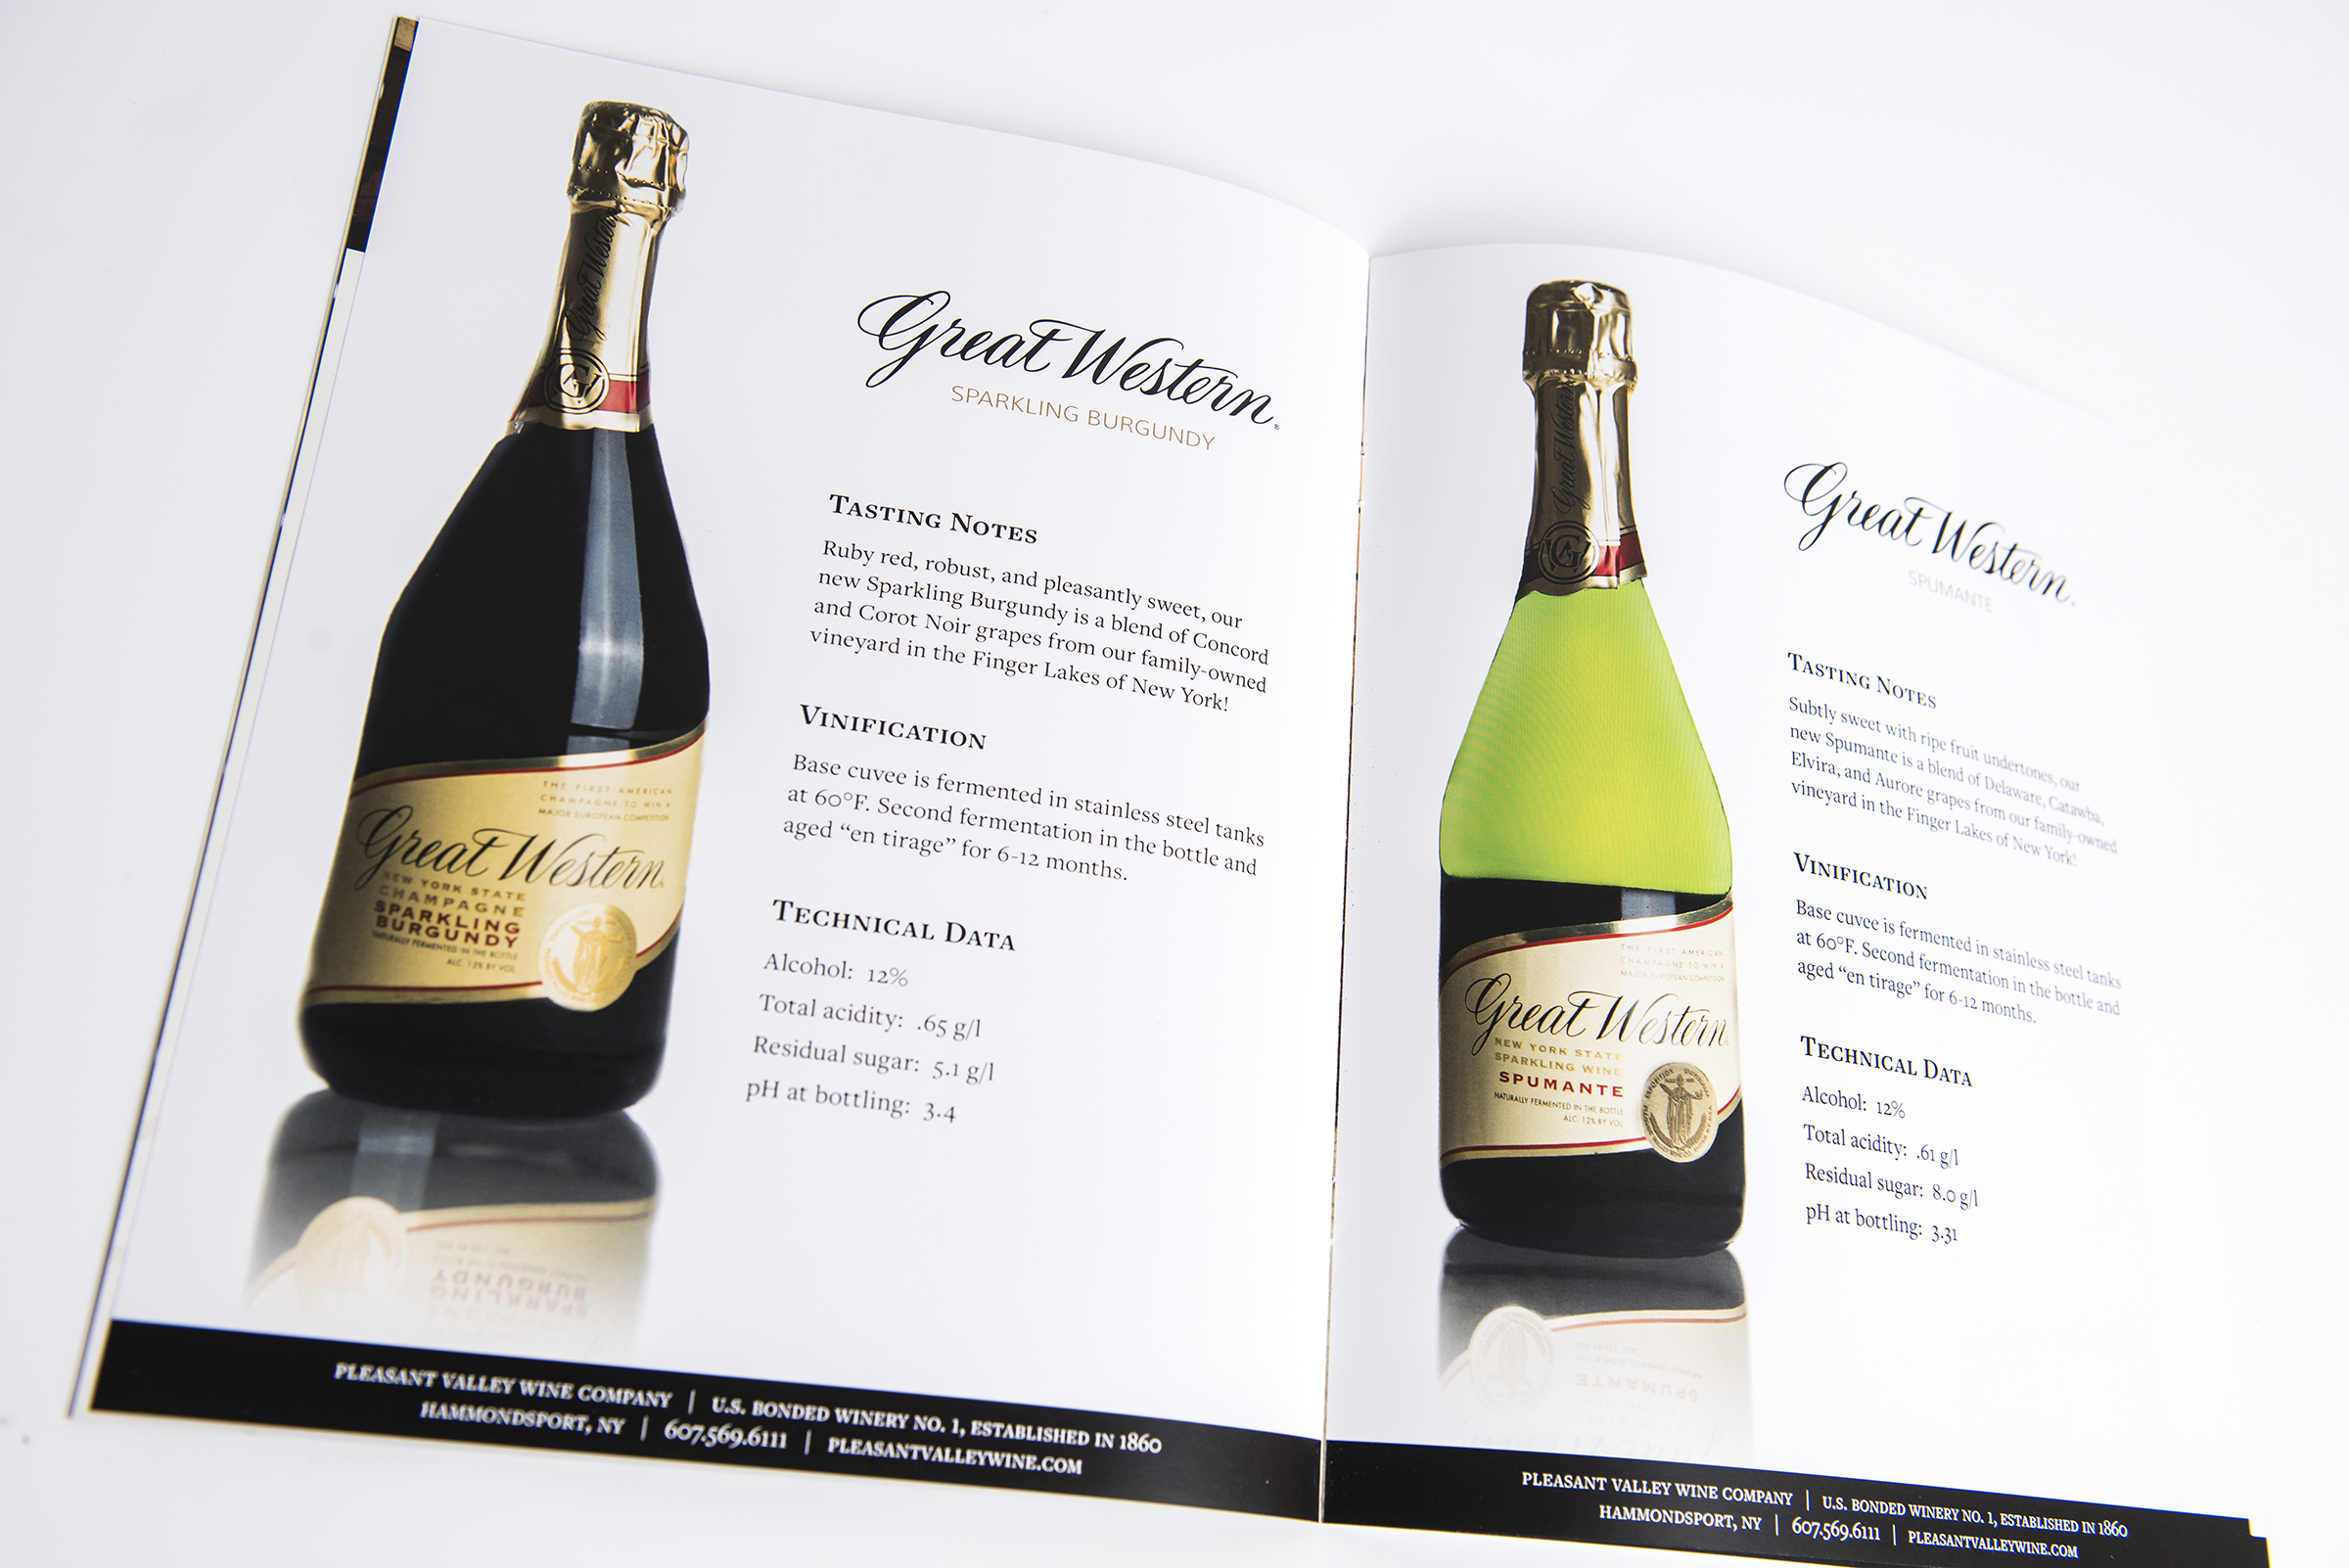 Printed booklet for Pleasant Valley Wine Company featuring wine tasting notes and other details